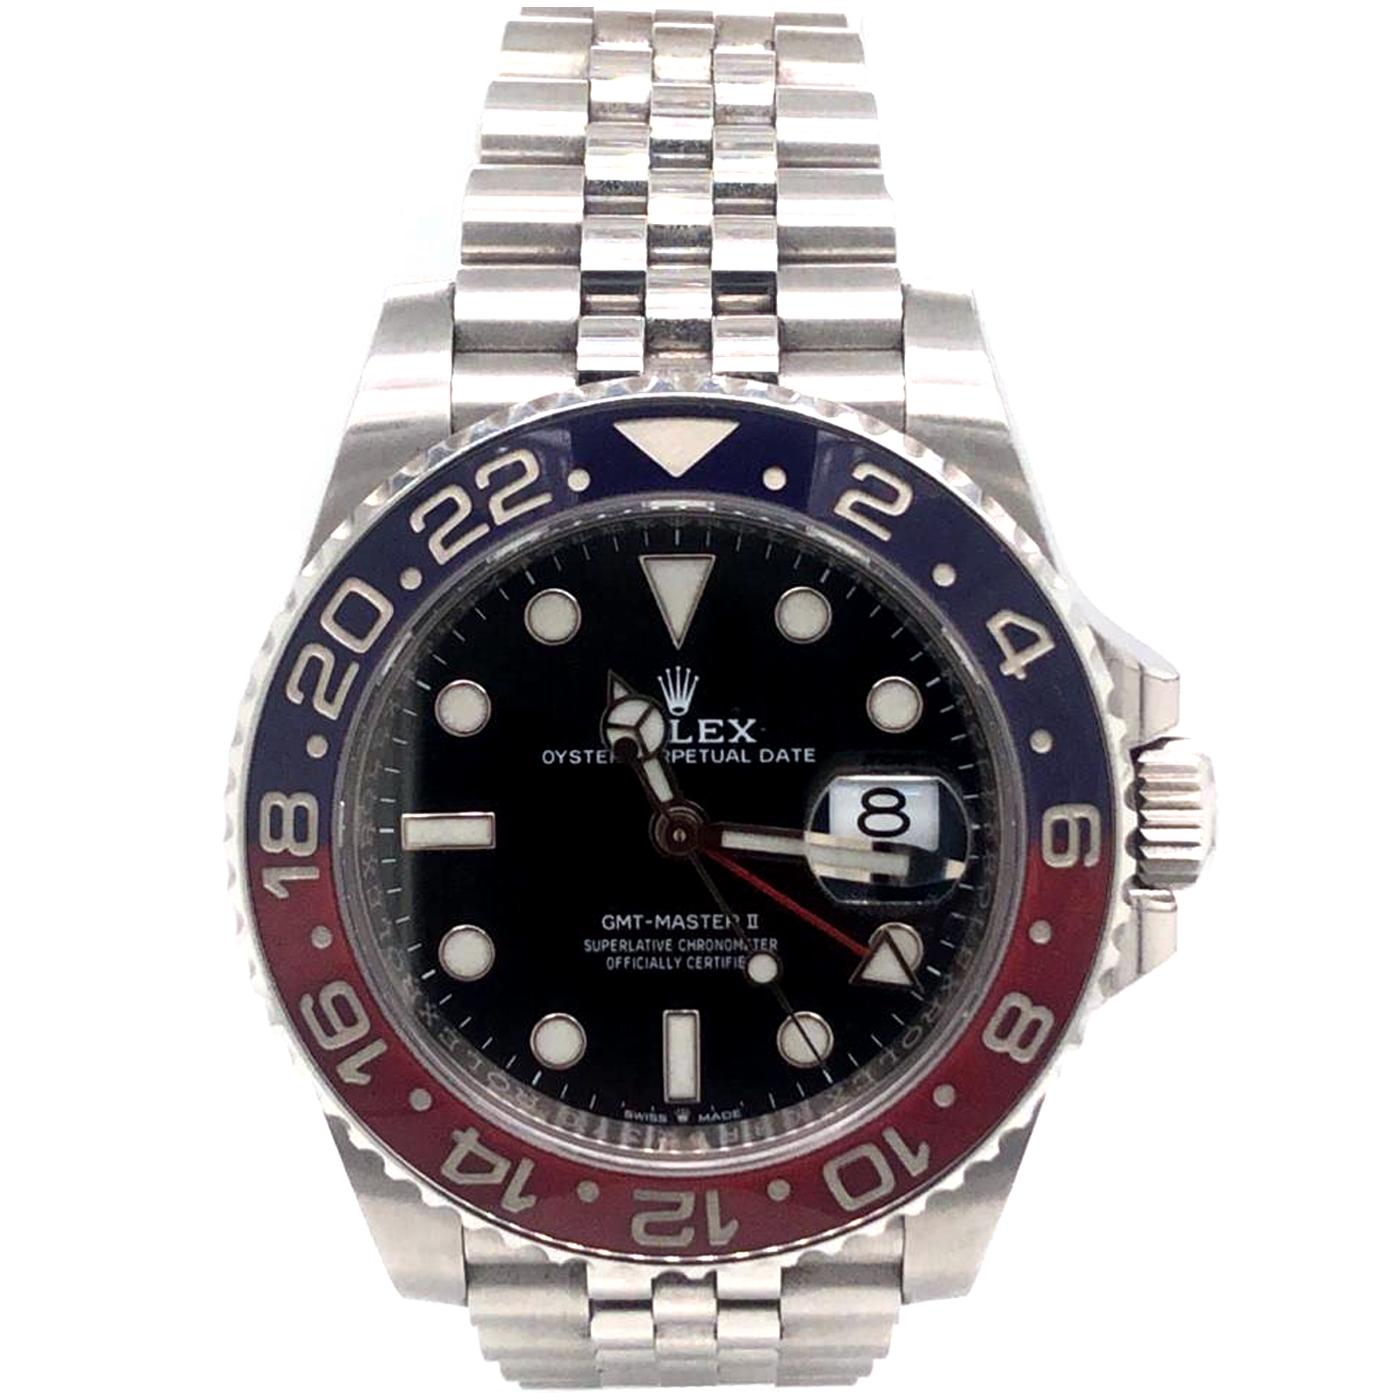 This Rolex GMT-Master II 126710BLRO Pepsi Blue & Red Bezel Stainless Steel Automatic Watch features a black dial and a two-color Cerachrom bezel insert in red and blue ceramic. Designed to show the time in two different time zones simultaneously